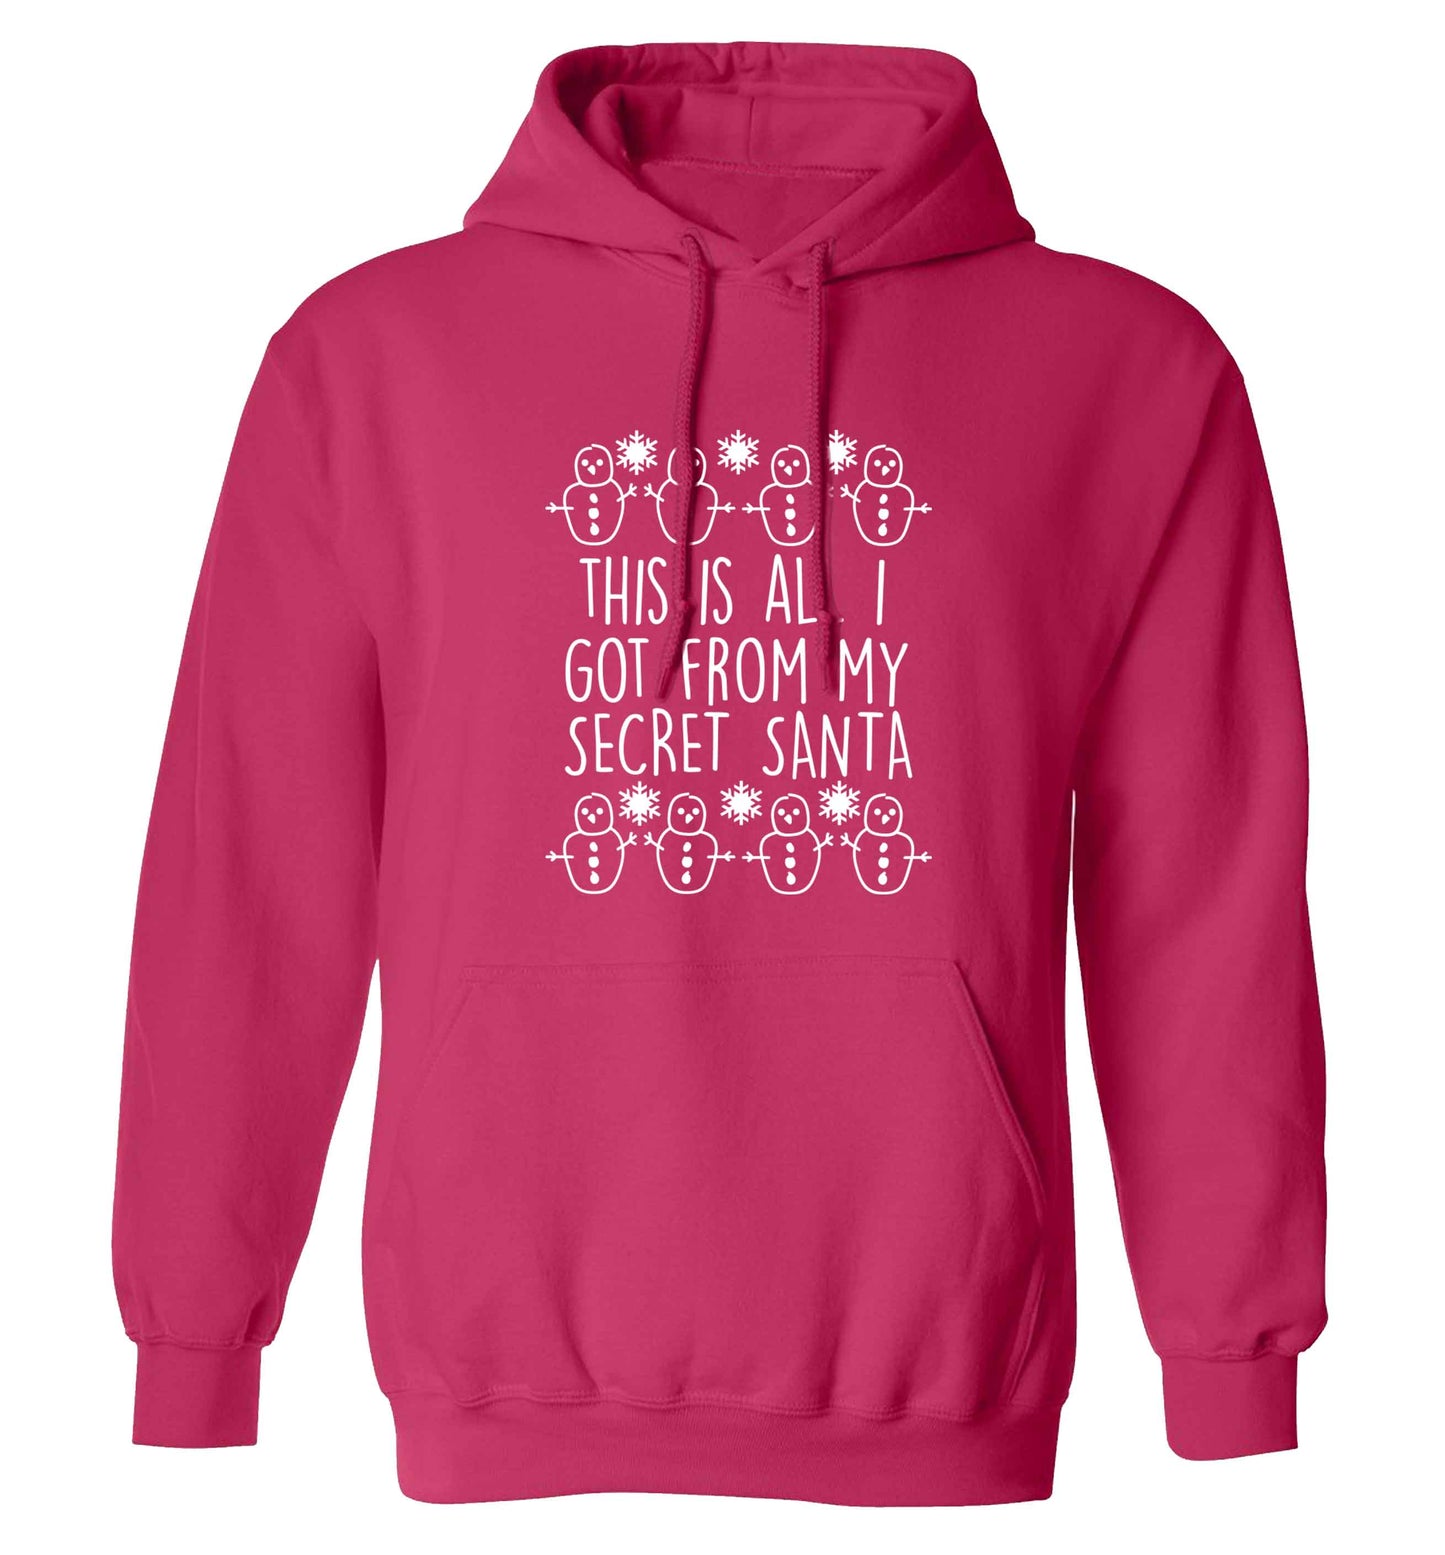 This is all I got from my secret Santa adults unisex pink hoodie 2XL